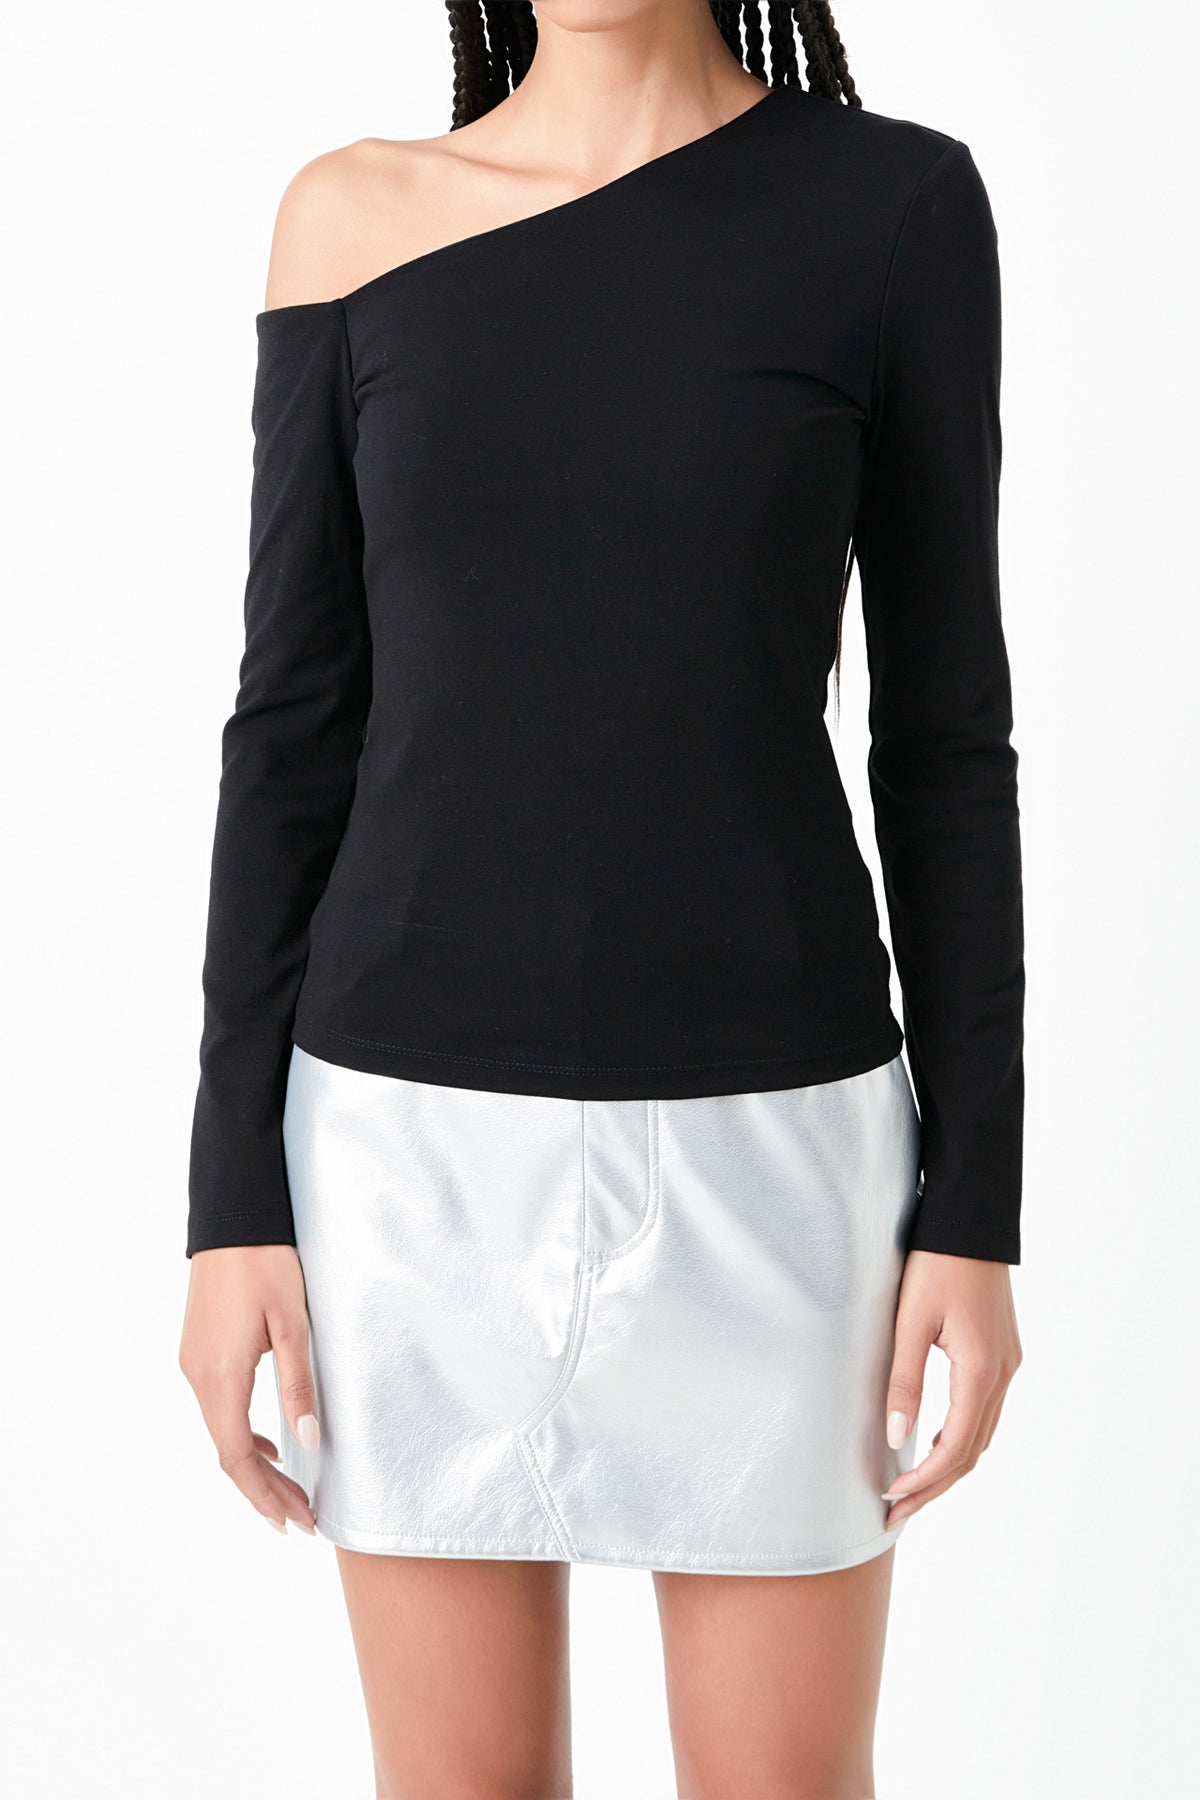 GREY LAB - Soft Knit Asymmetrical Top - TOPS available at Objectrare